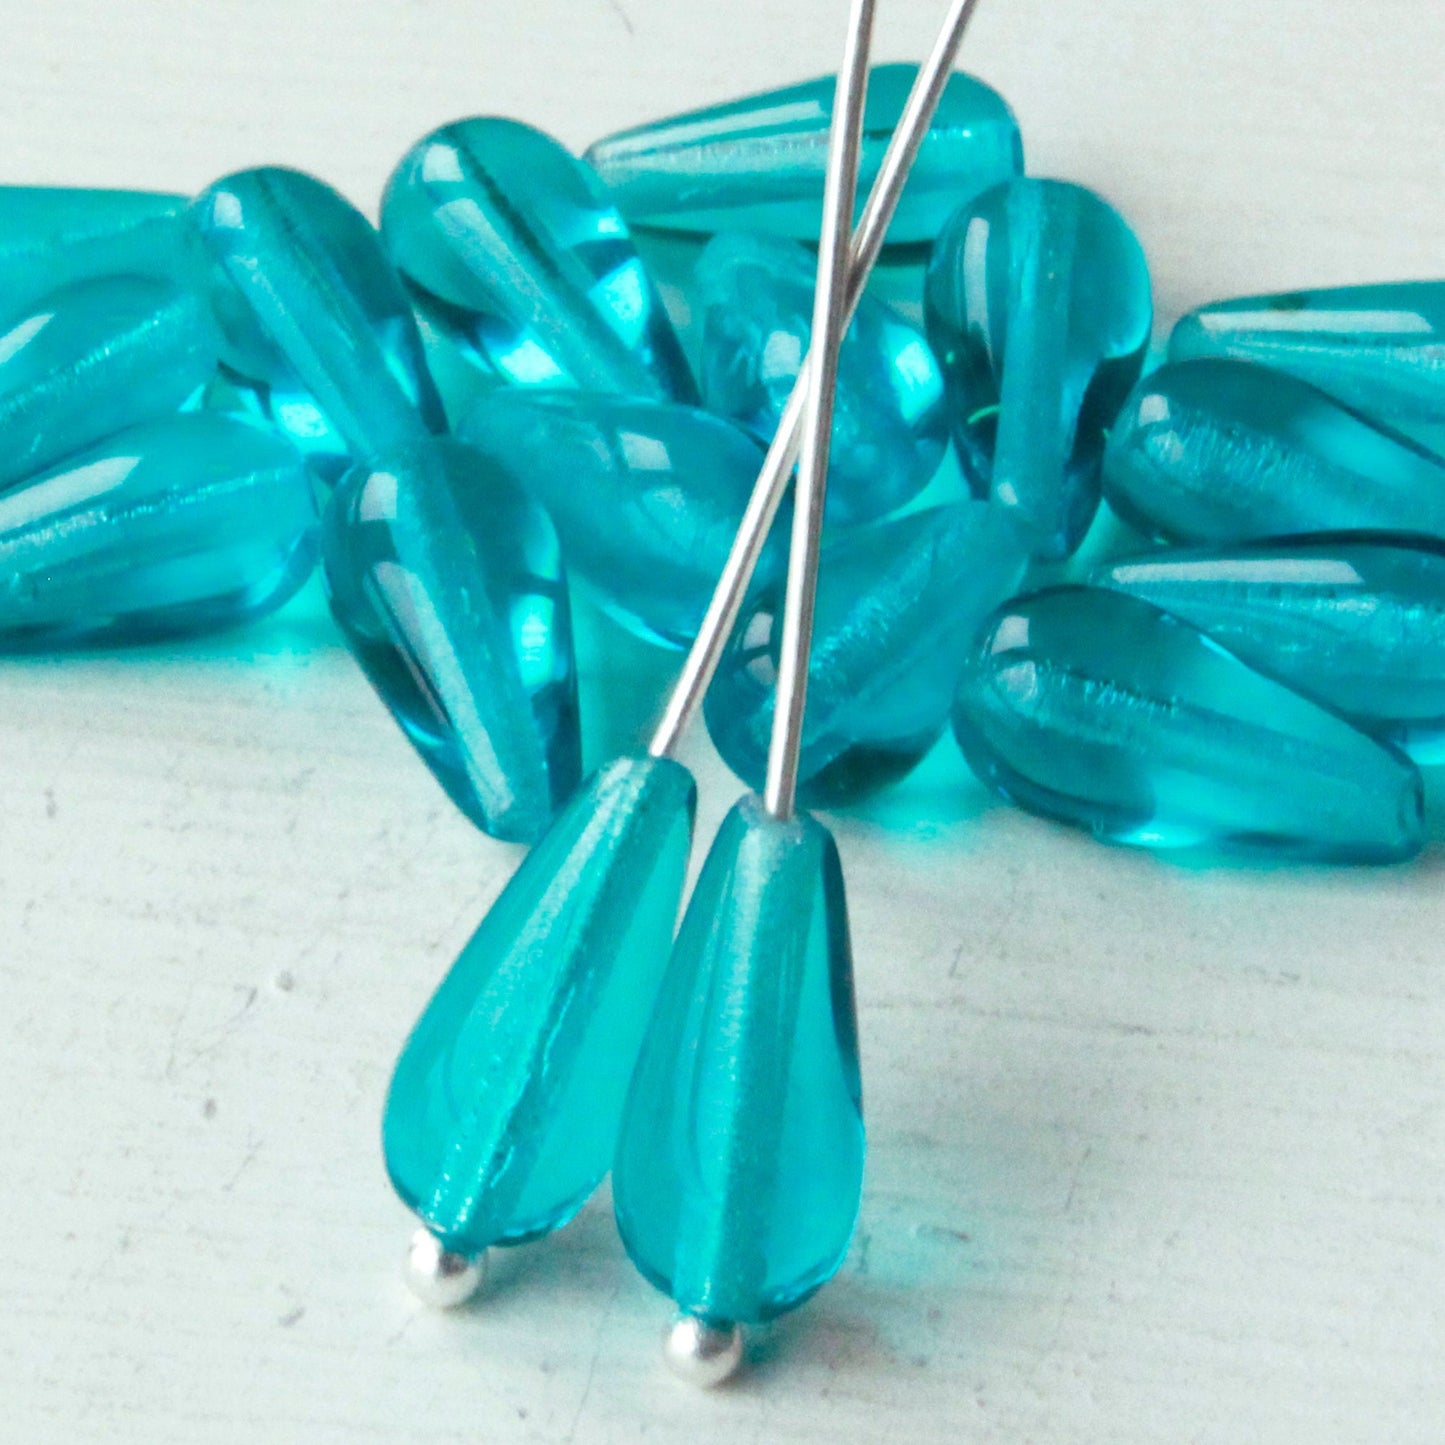 6x12mm Long Drilled Drops - Teal - 20 Beads